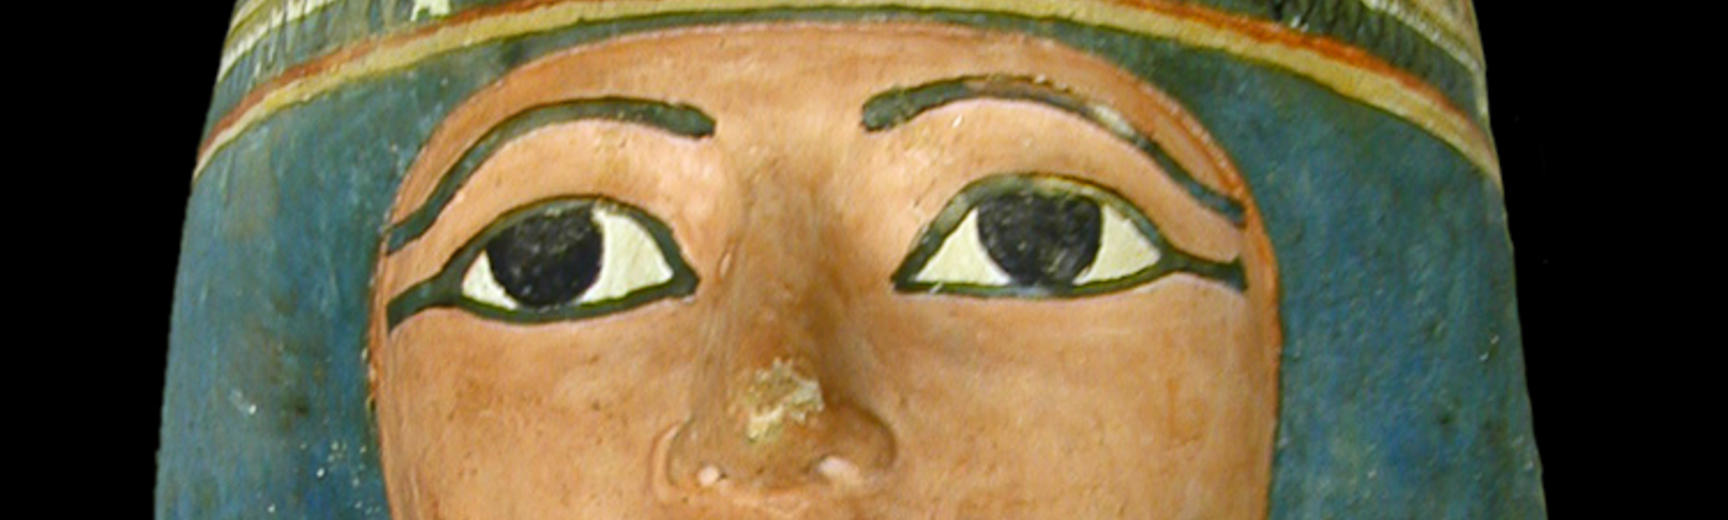 Mummy face with eyes distinctly outlined in black eye liner and a pale indigo wig surrounding the face